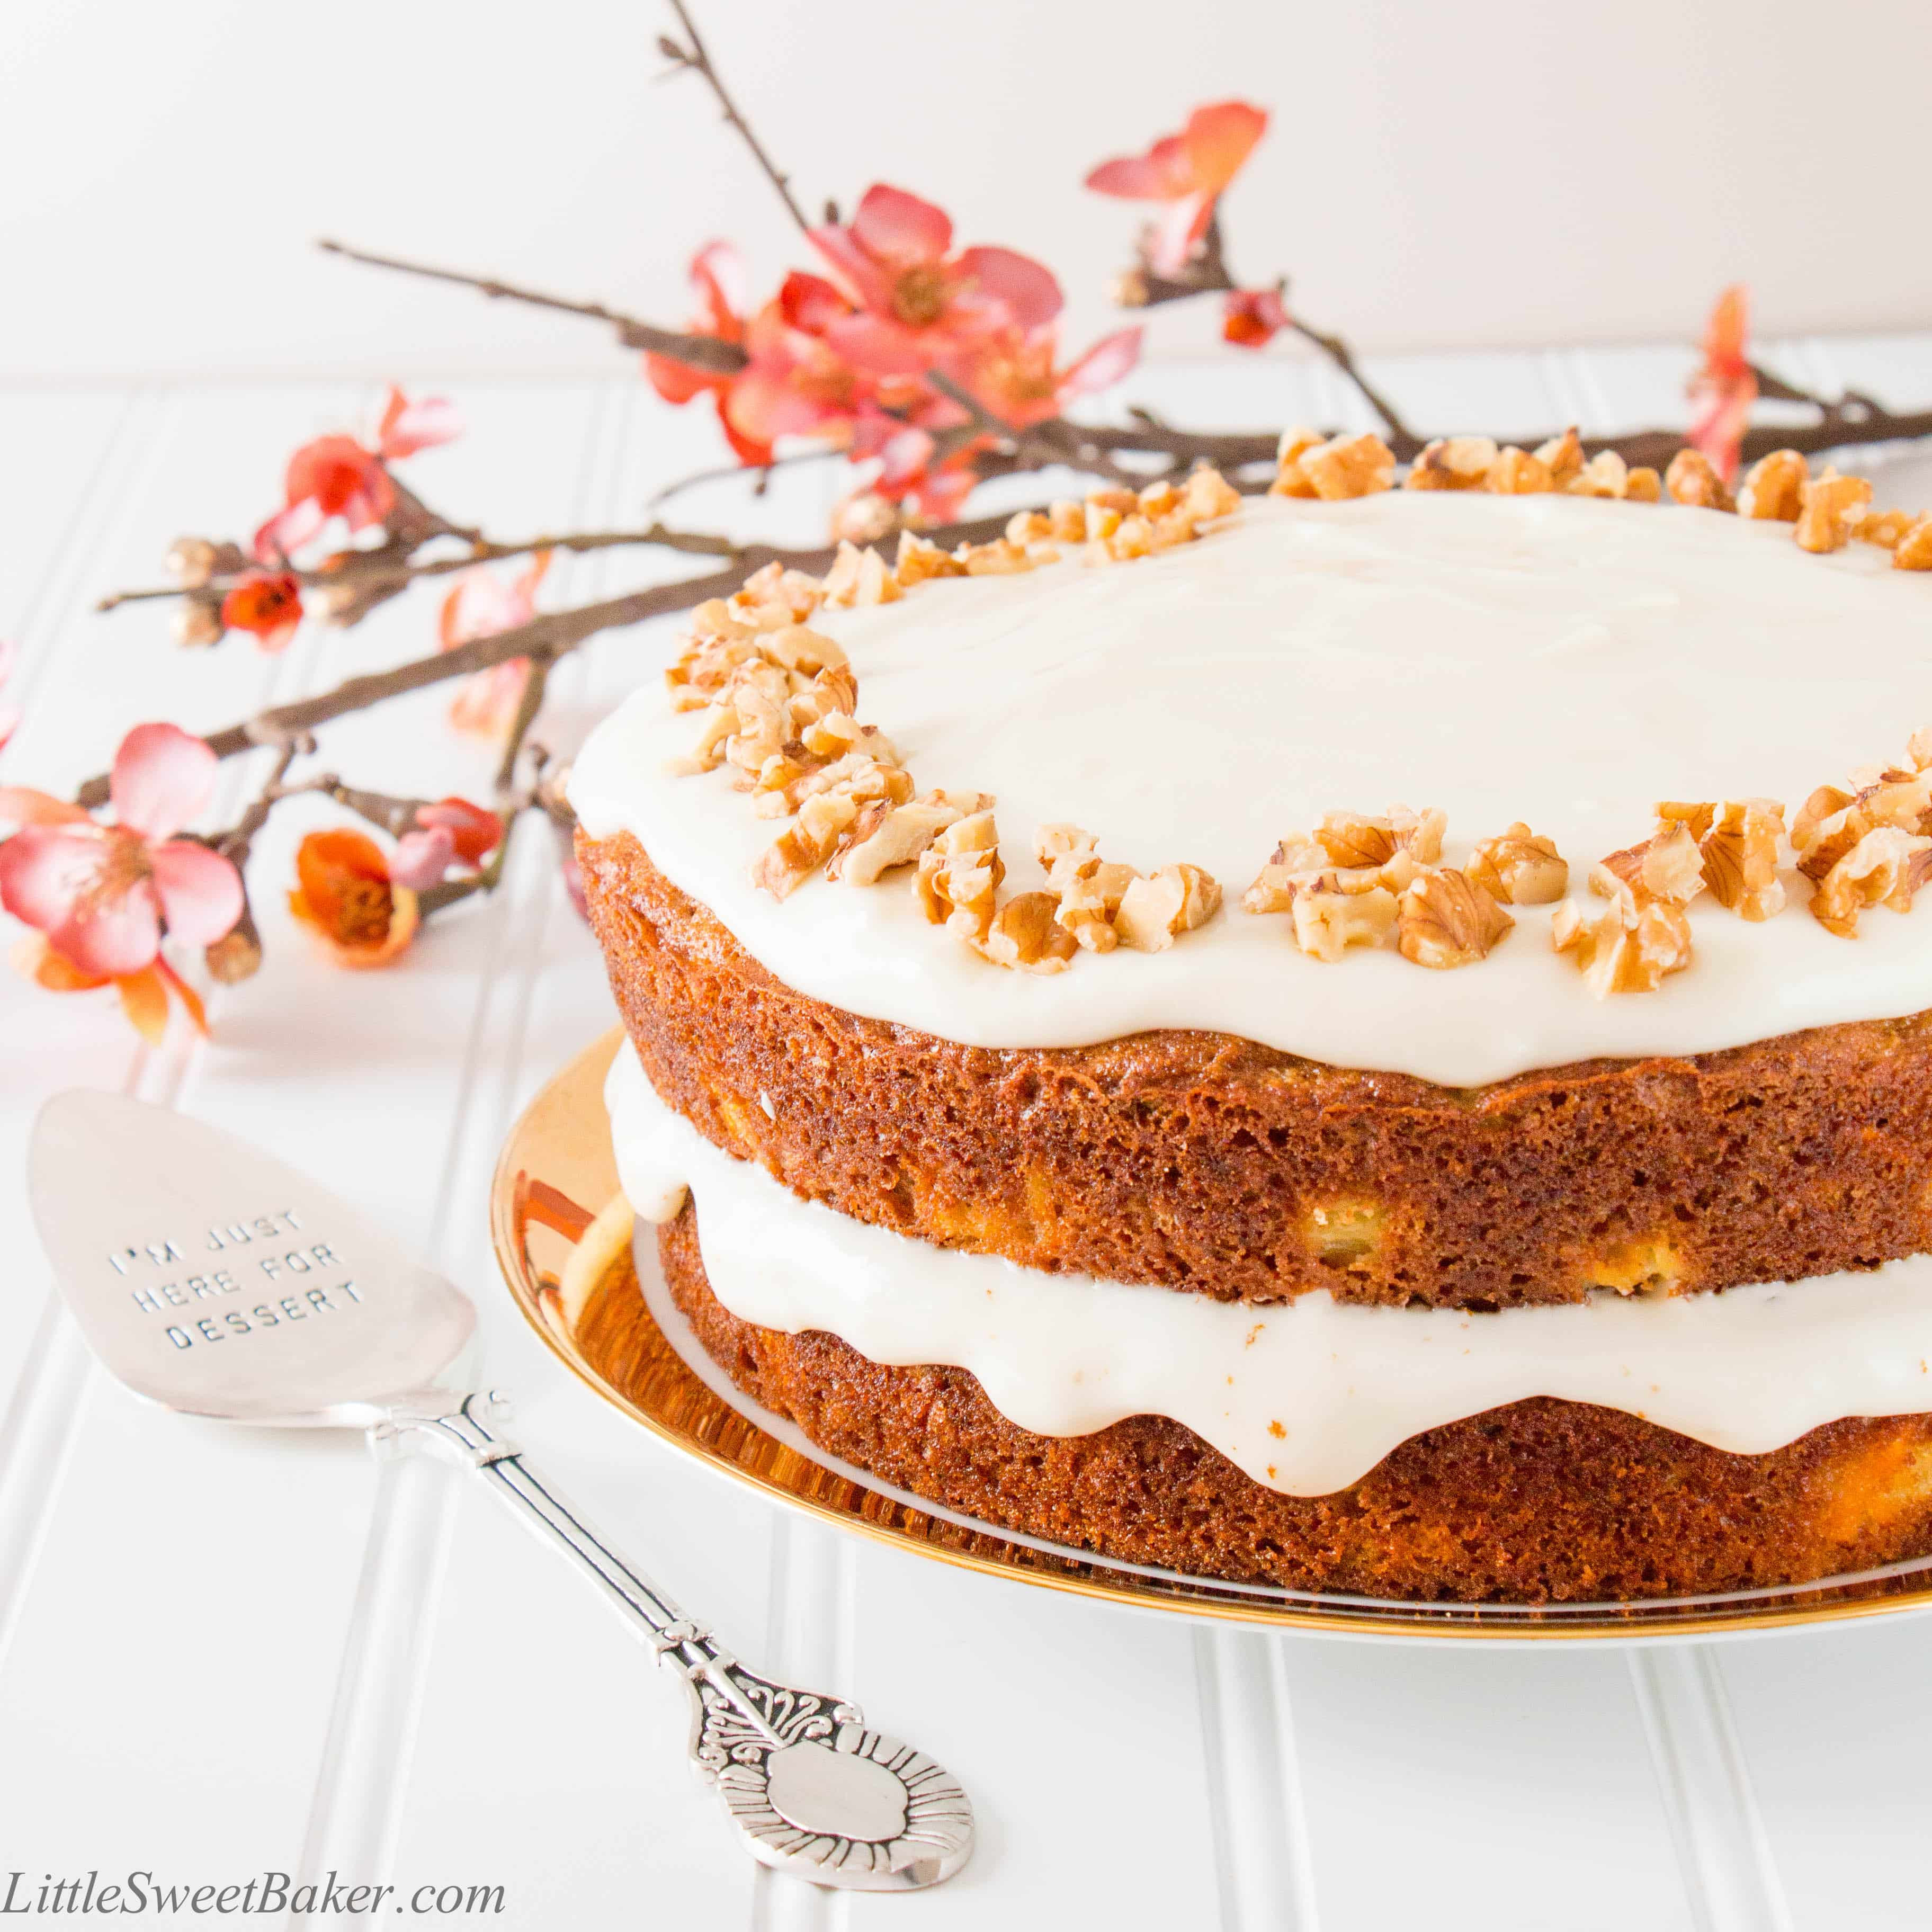 Carrot Cake Healthy
 Healthy Carrot Cake with Yogurt Cream Cheese Frosting